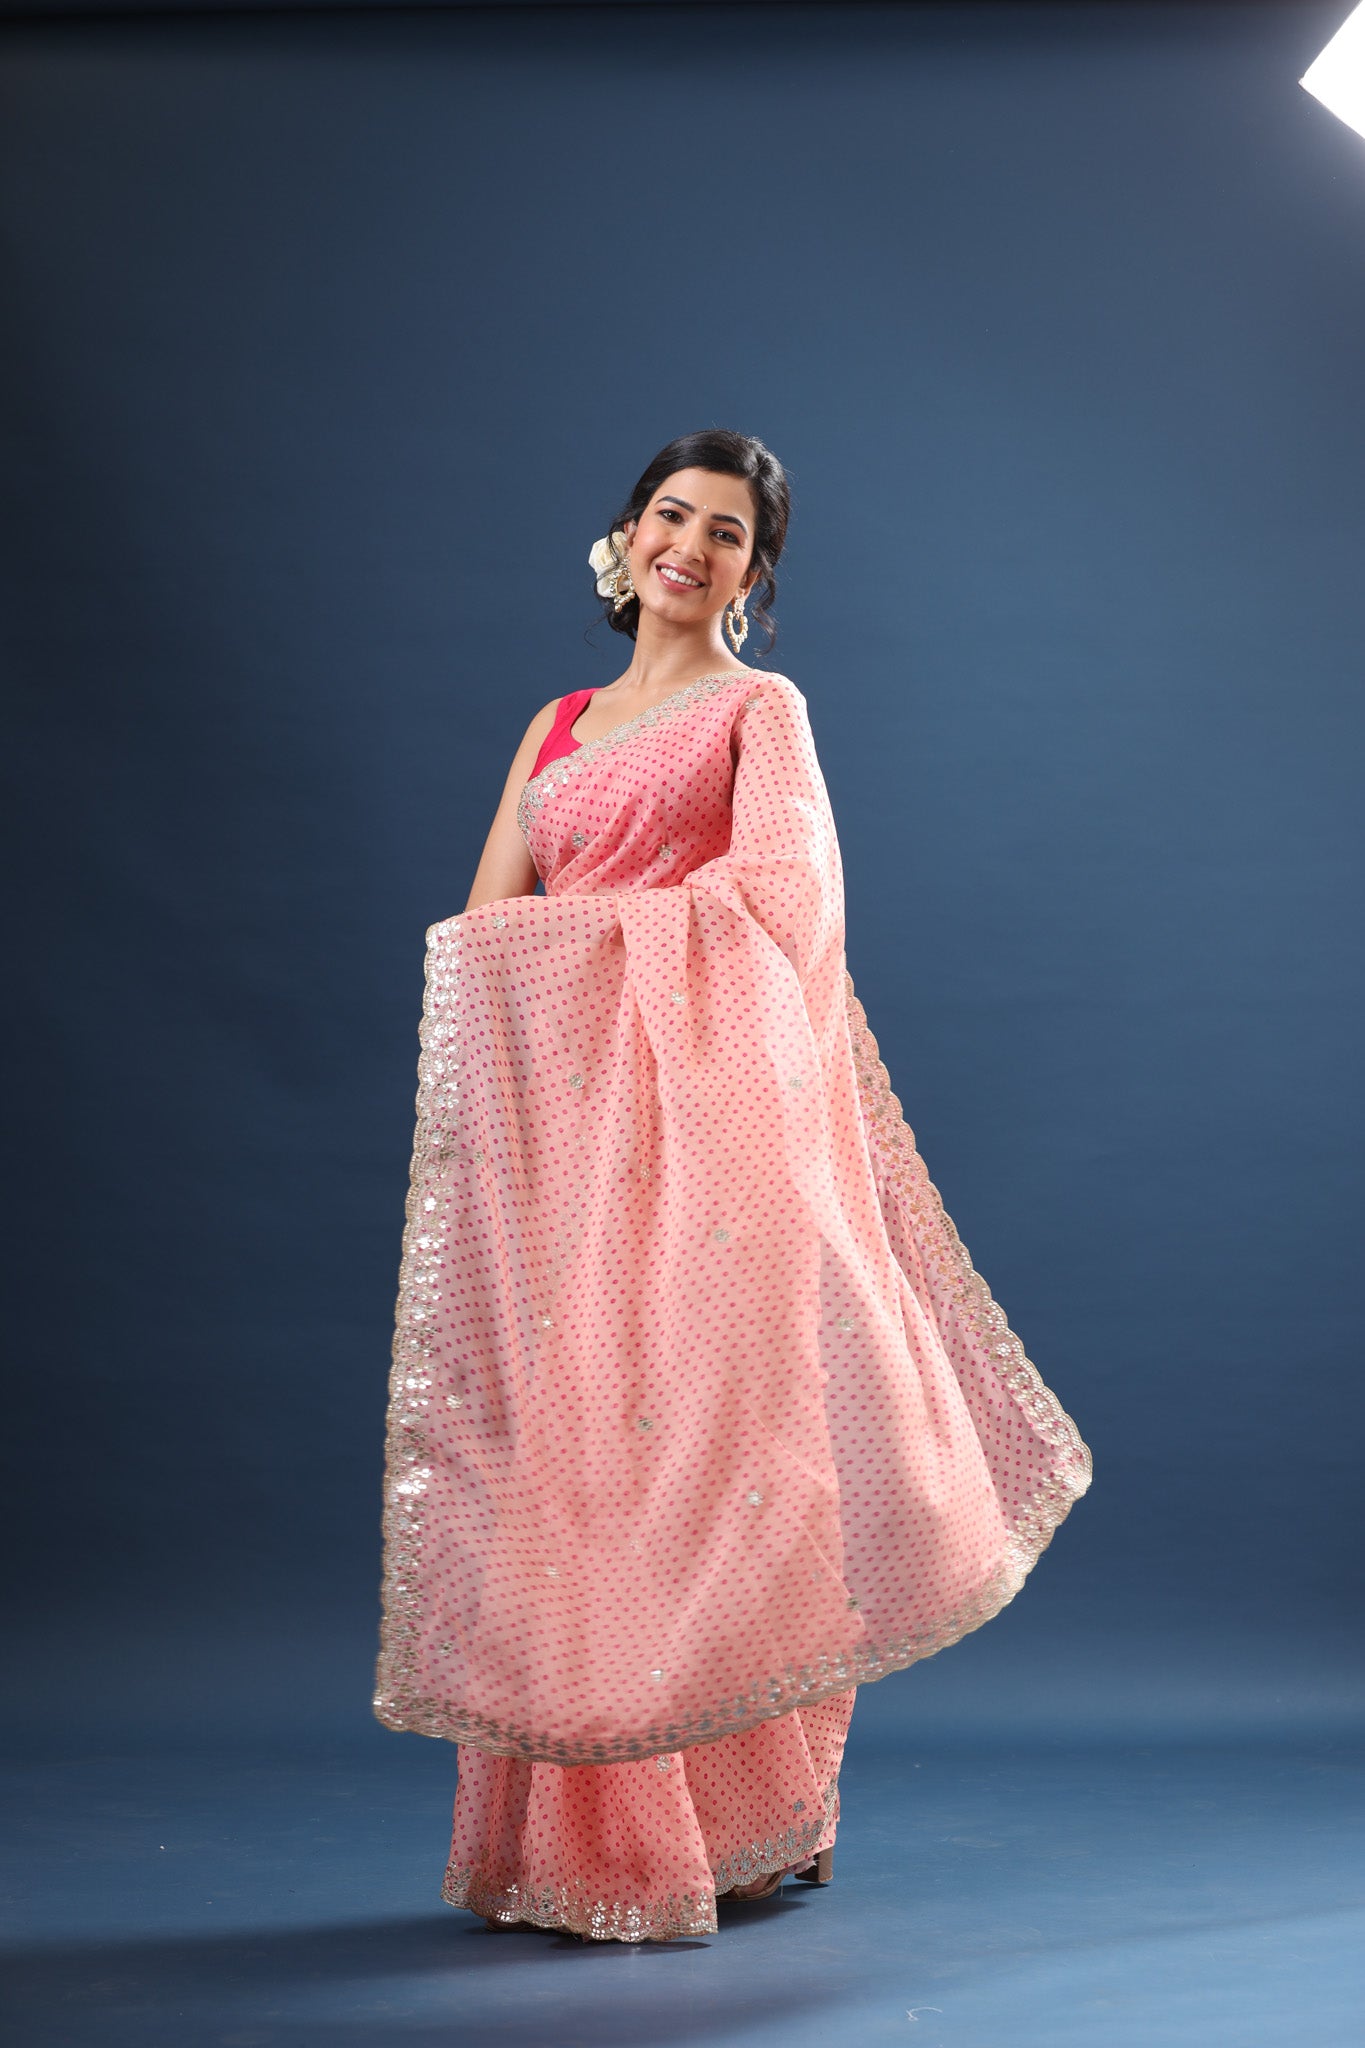 Buy powder pink bandhej organza sari online in USA with scalloped border. Make a fashion statement at weddings with stunning designer sarees, embroidered sarees with blouse, wedding sarees, handloom sarees from Pure Elegance Indian fashion store in USA.-saree